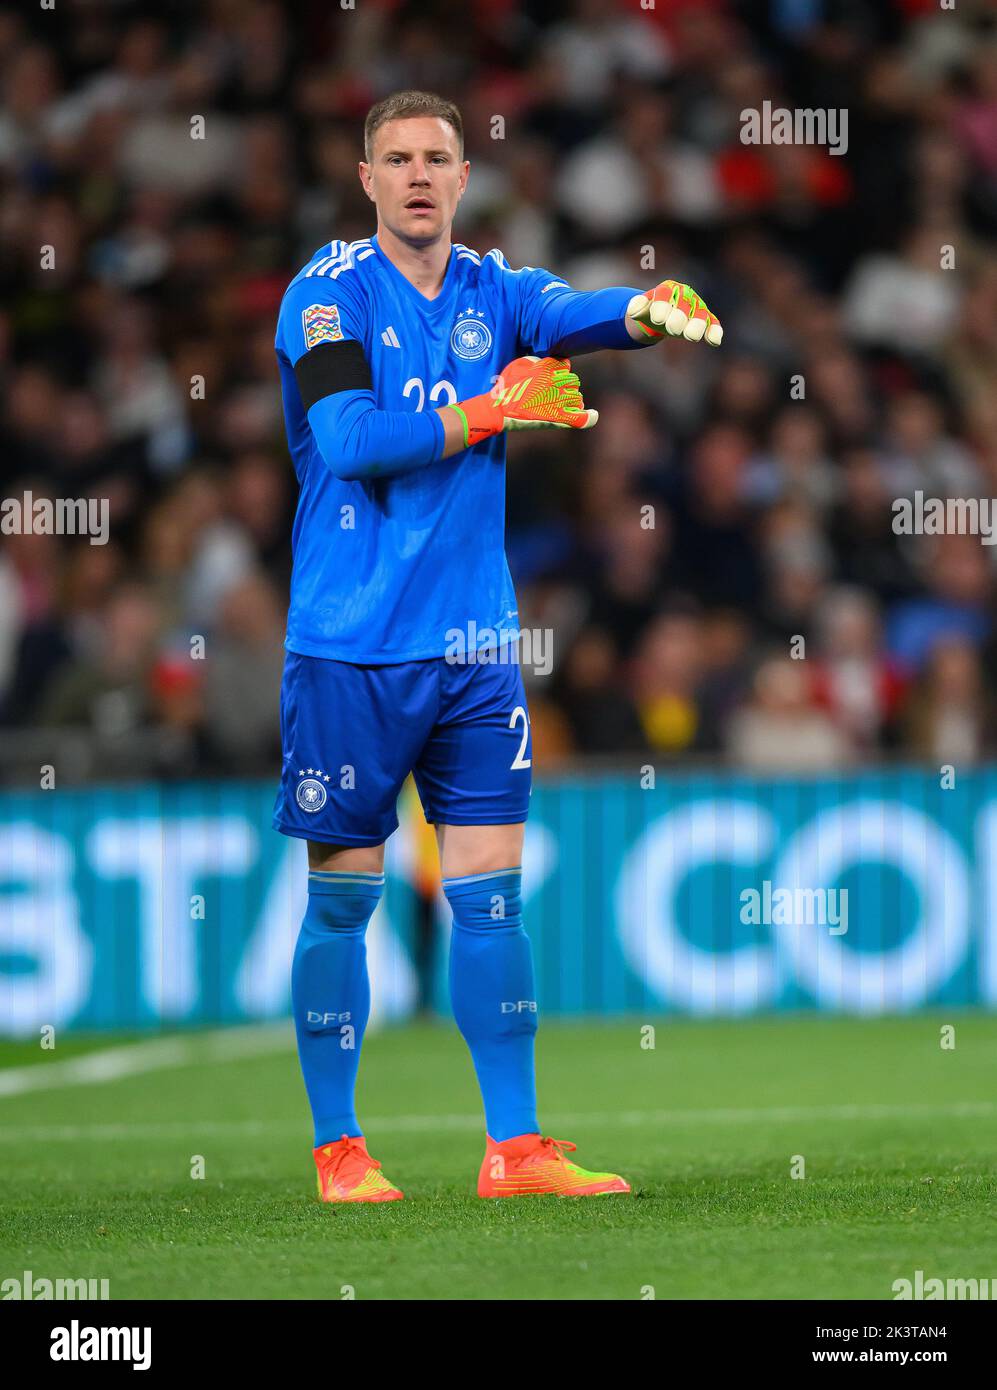 26 Sep 2022 - England v Germany - UEFA Nations League - League A - Group 3 - Wembley Stadium  Germany's Marc-André ter Stegen during the UEFA Nations League match against England. Picture : Mark Pain / Alamy Live News Stock Photo